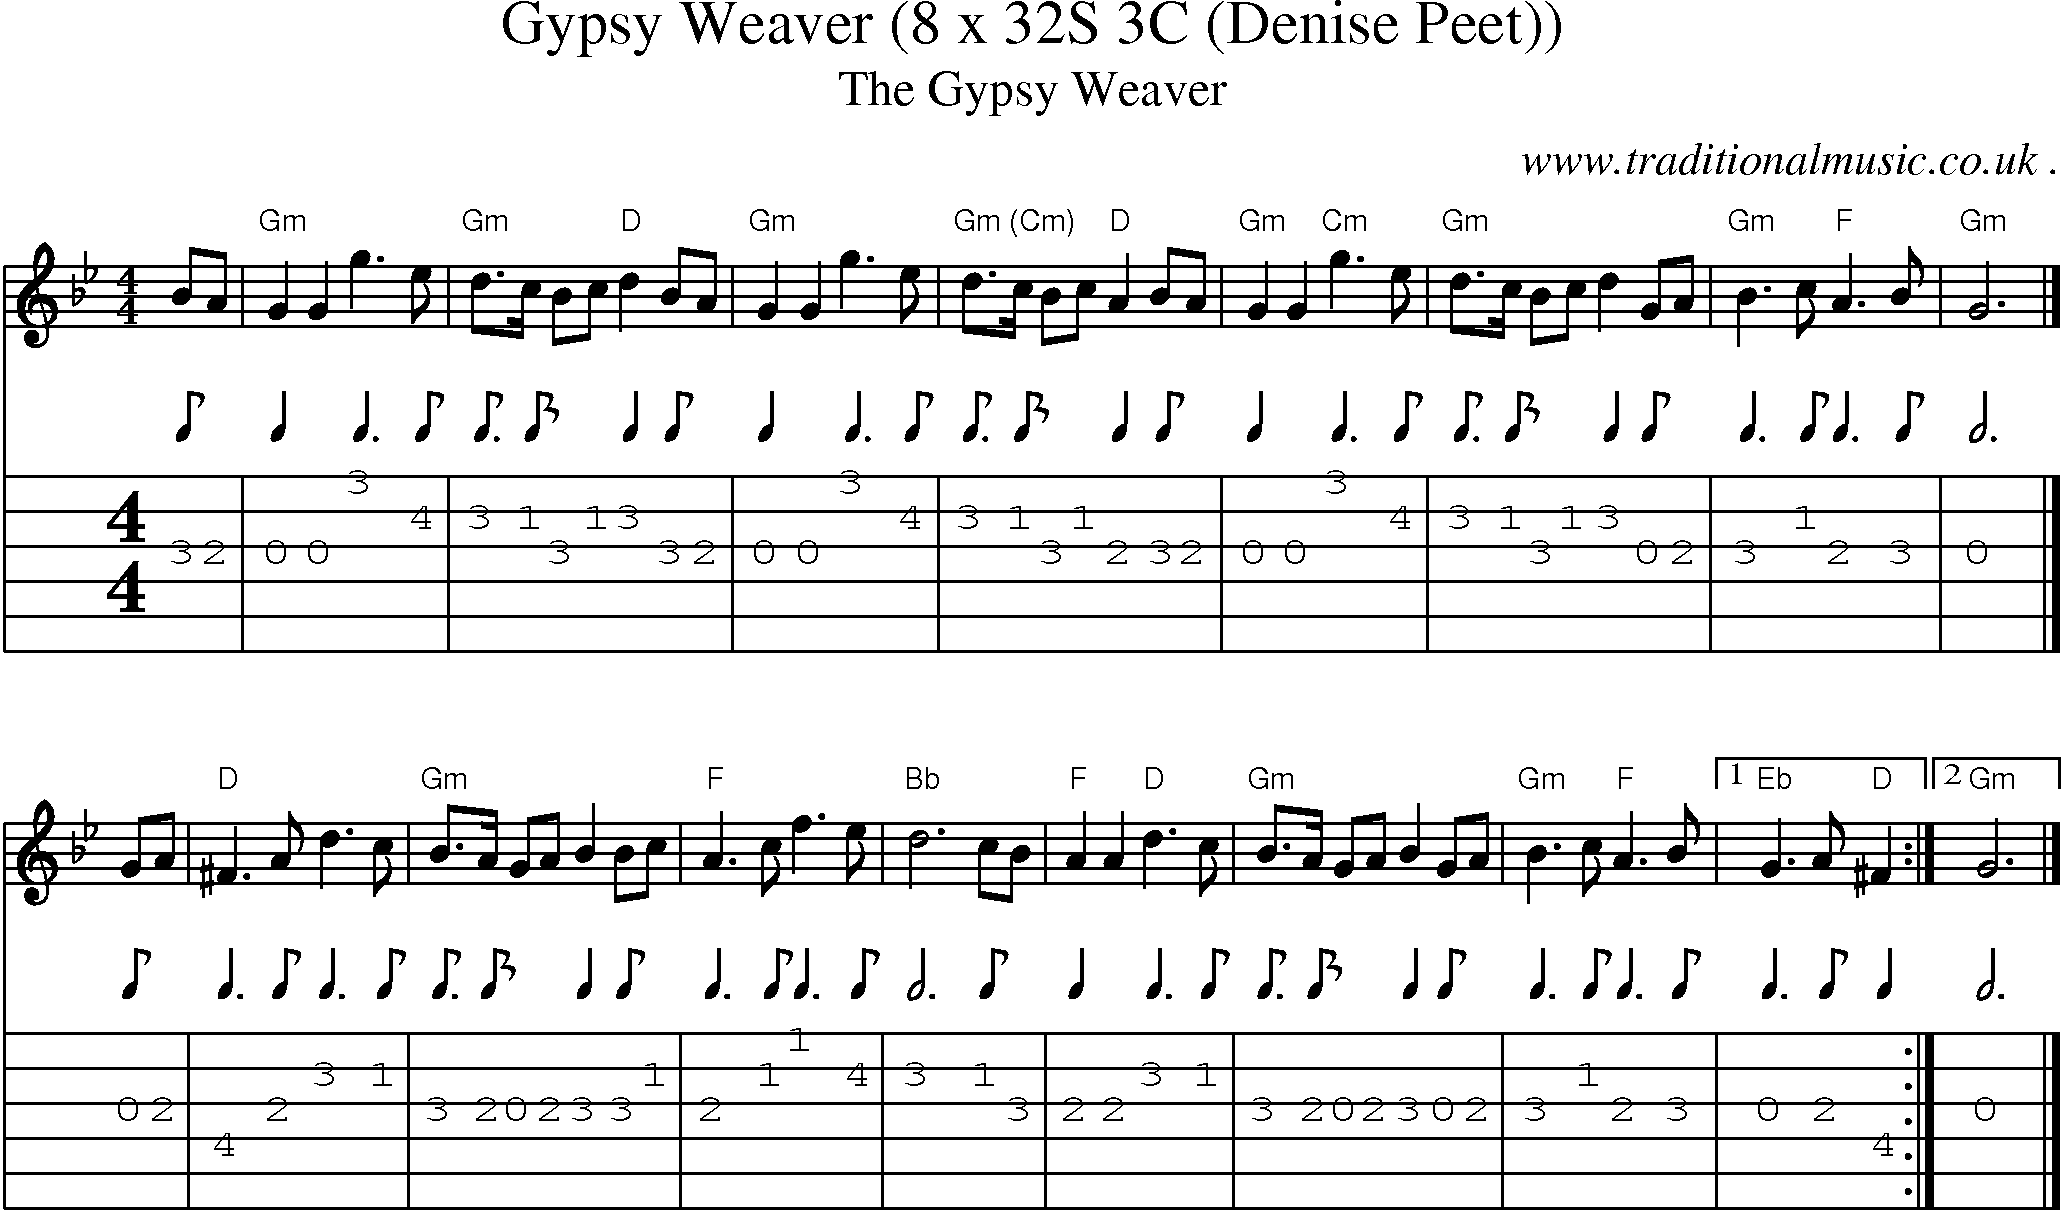 Sheet-music  score, Chords and Guitar Tabs for Gypsy Weaver 8 X 32s 3c Denise Peet